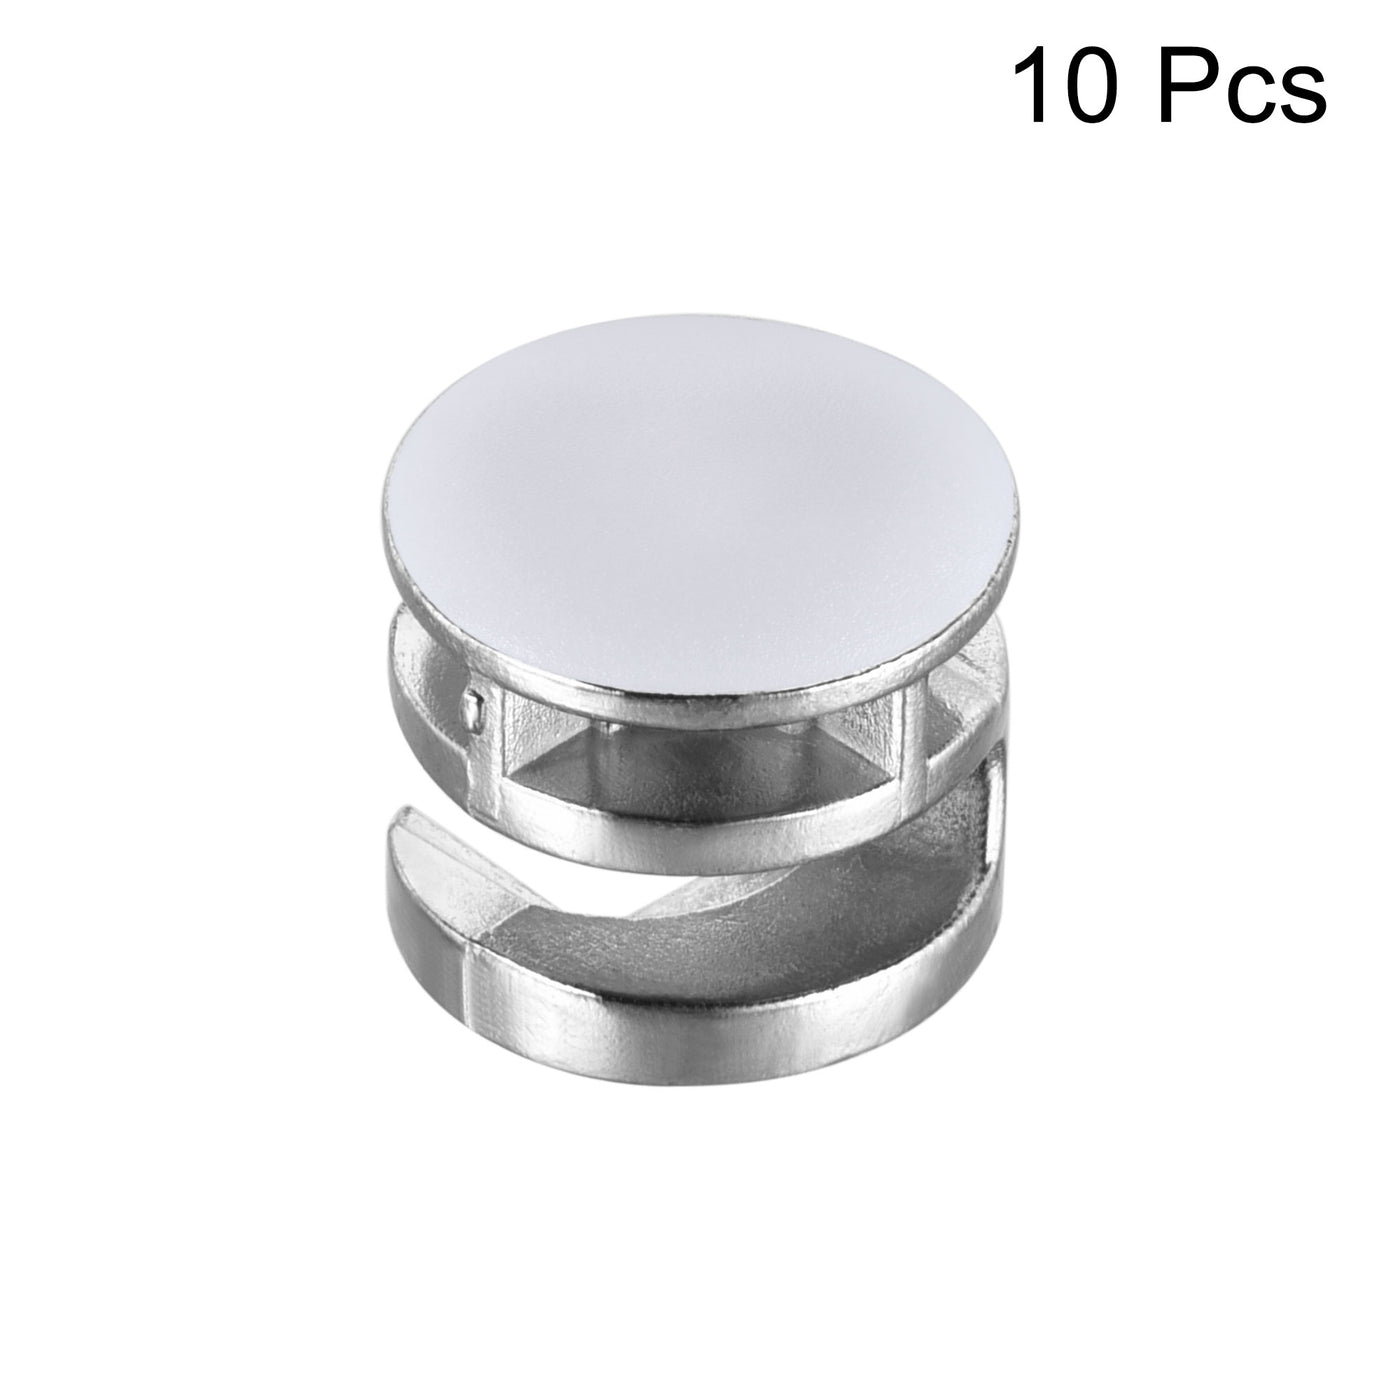 Uxcell Uxcell Furniture Connector Cam Lock Fittings 15mm x 12mm with White Cover for Furniture Panel Connecting 10pcs